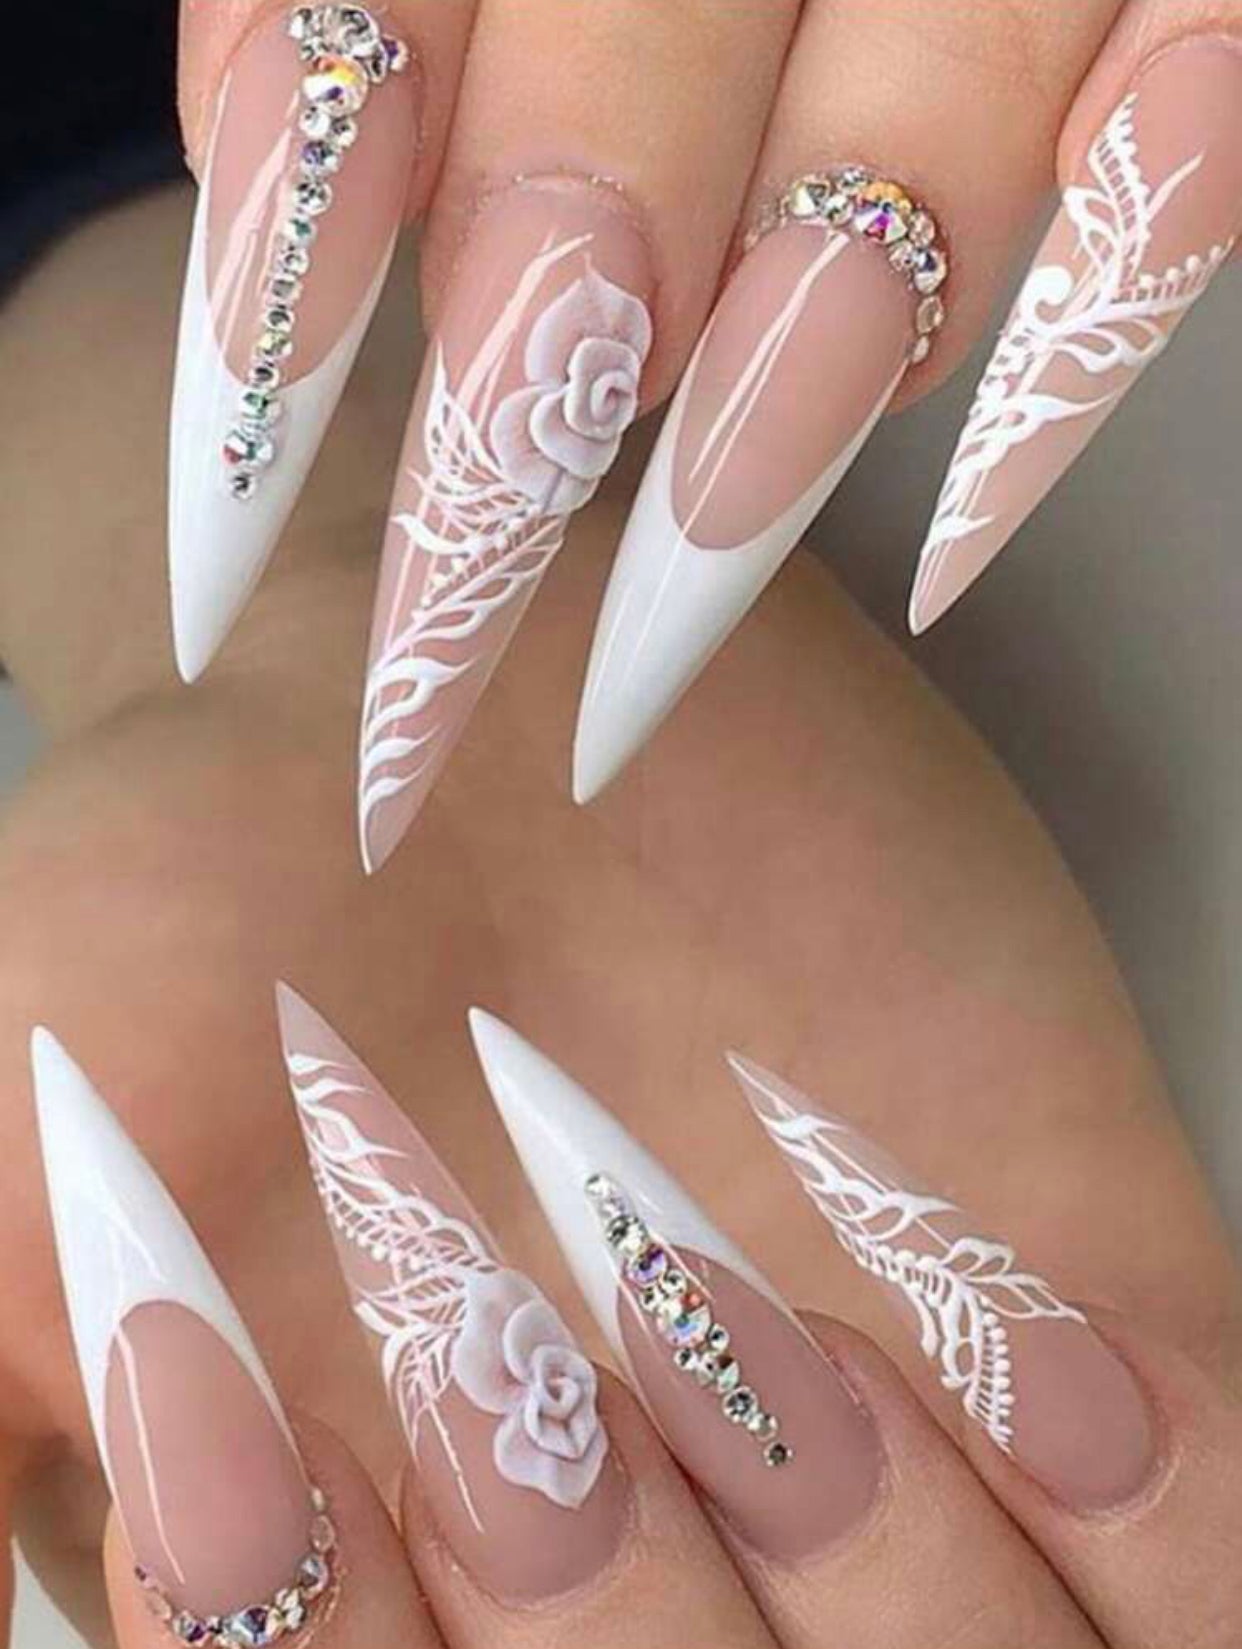 false press on nails in a stiletto shape with jewels and airbrush flower designs on the accent nails